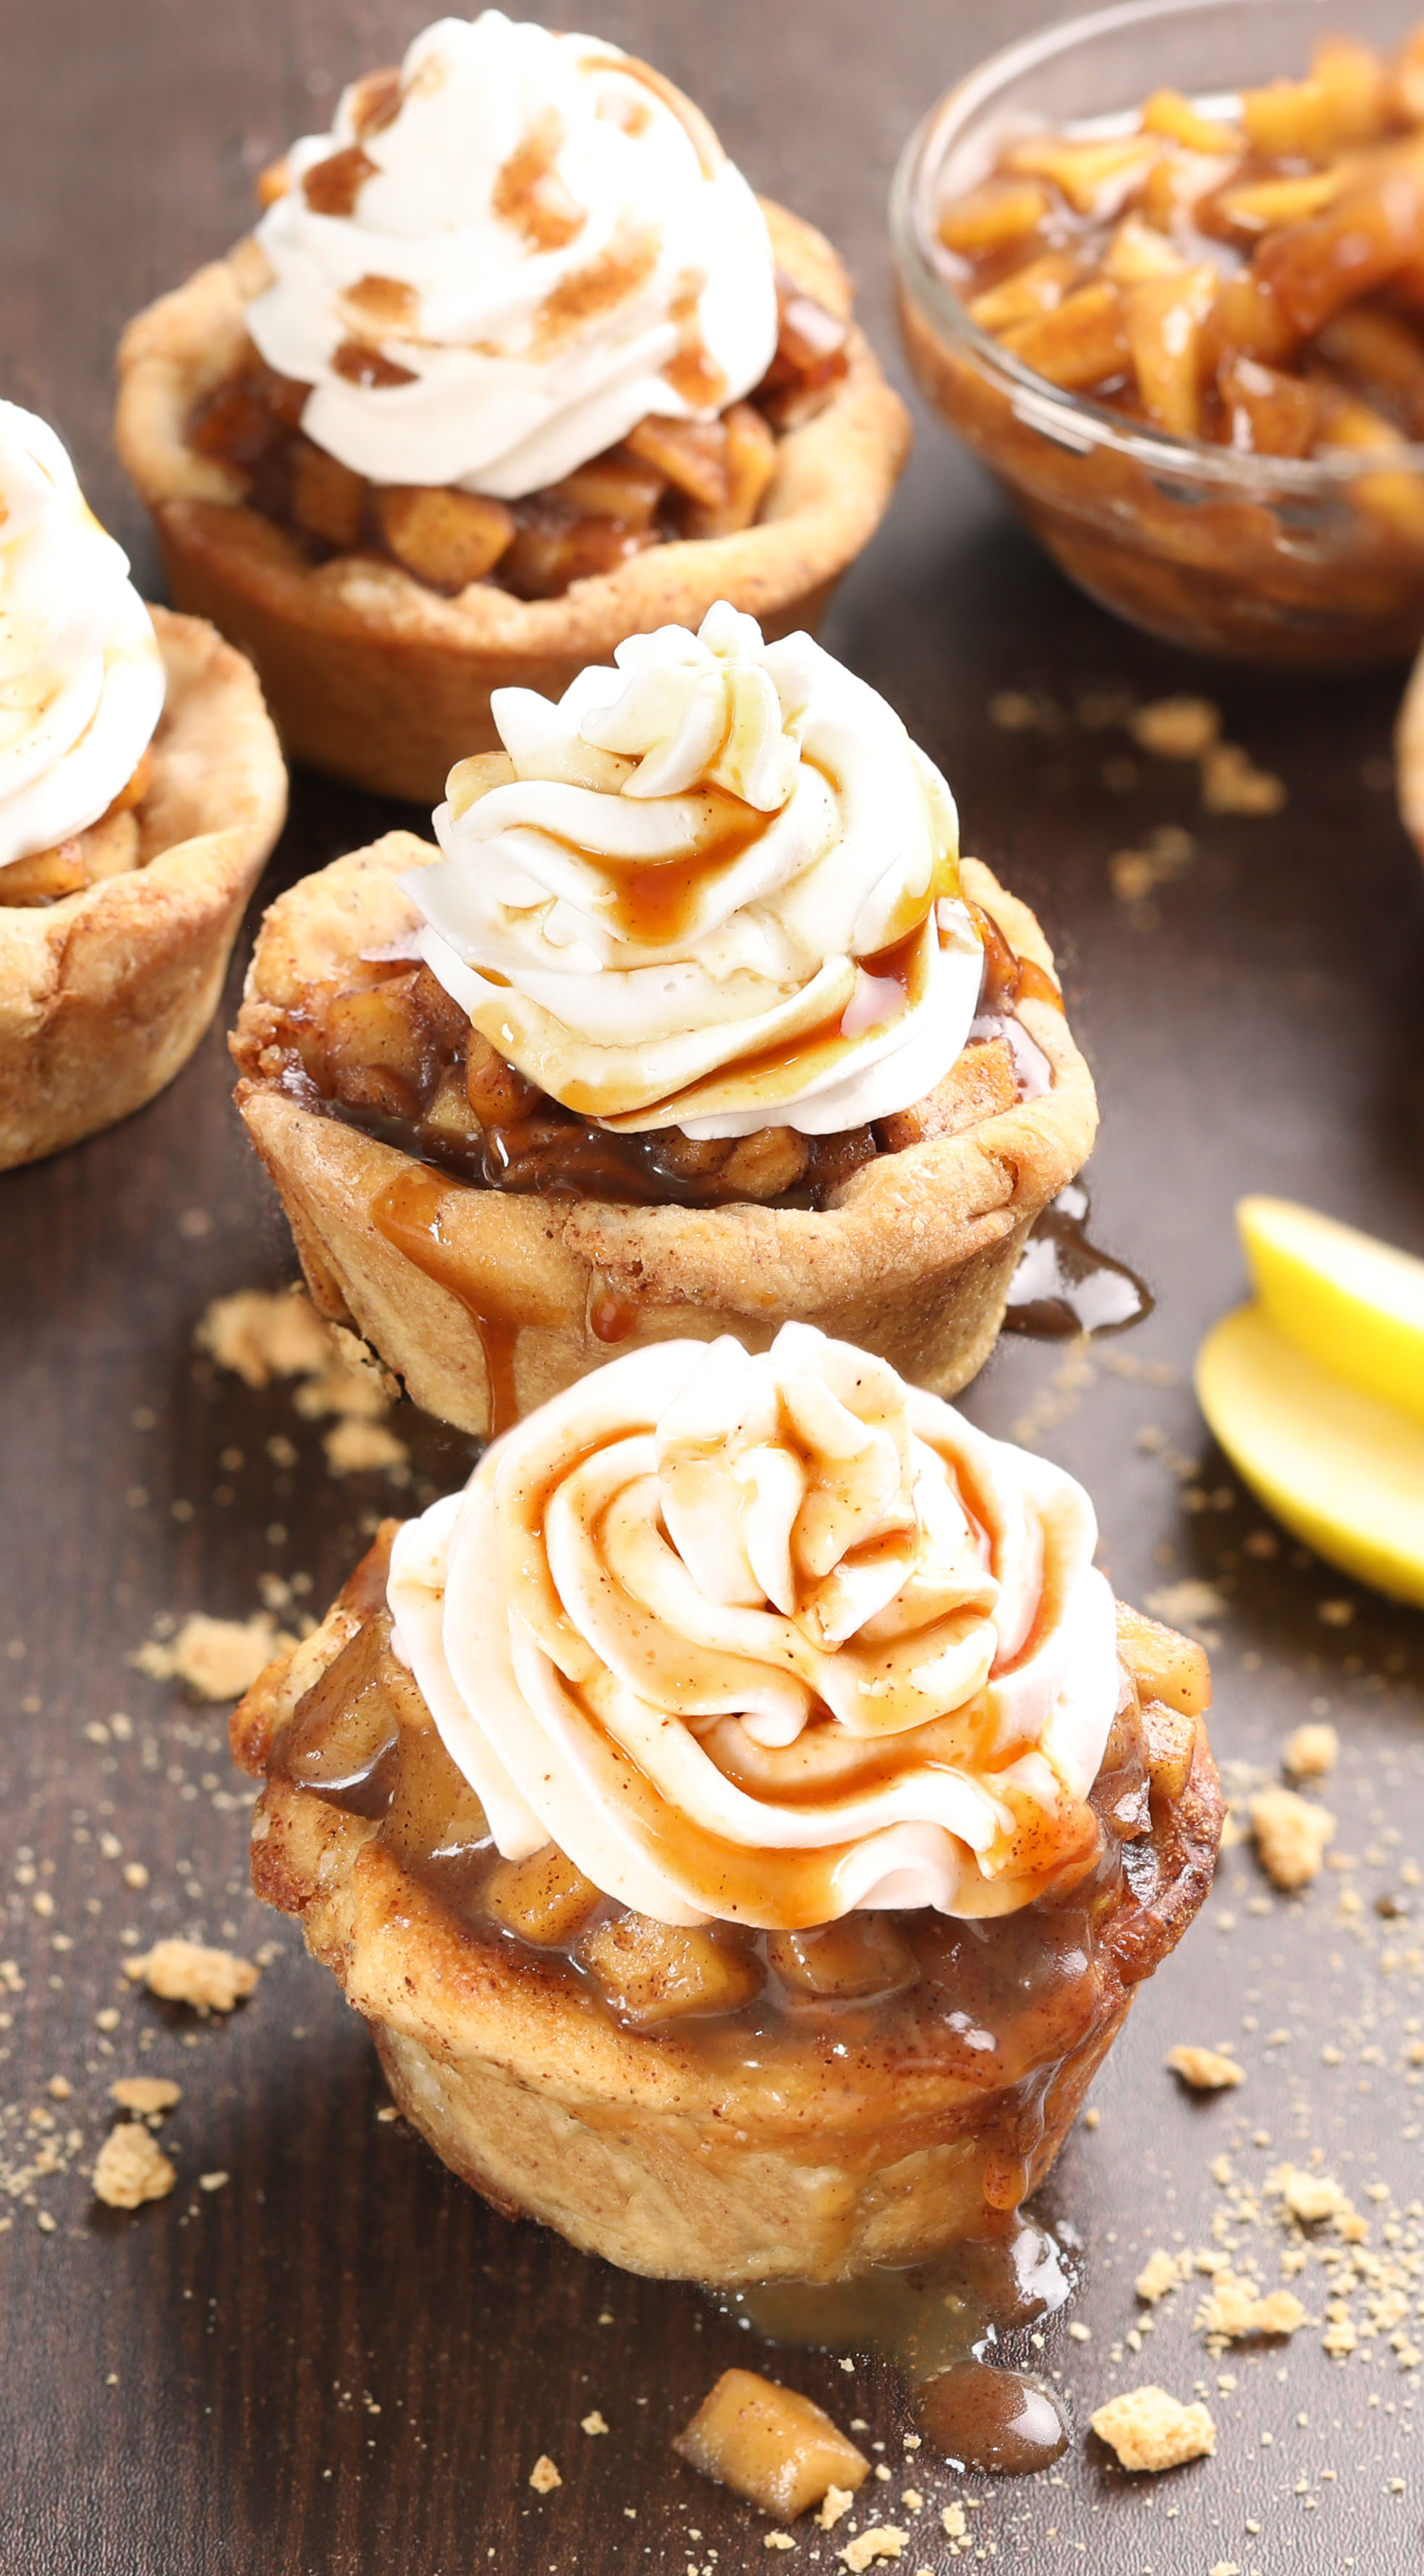 Apple Pie Bites - Bite-size cinnamon roll cups that are filled with warm spiced apple pie filling and crumbly topping. The ultimate fall dessert!